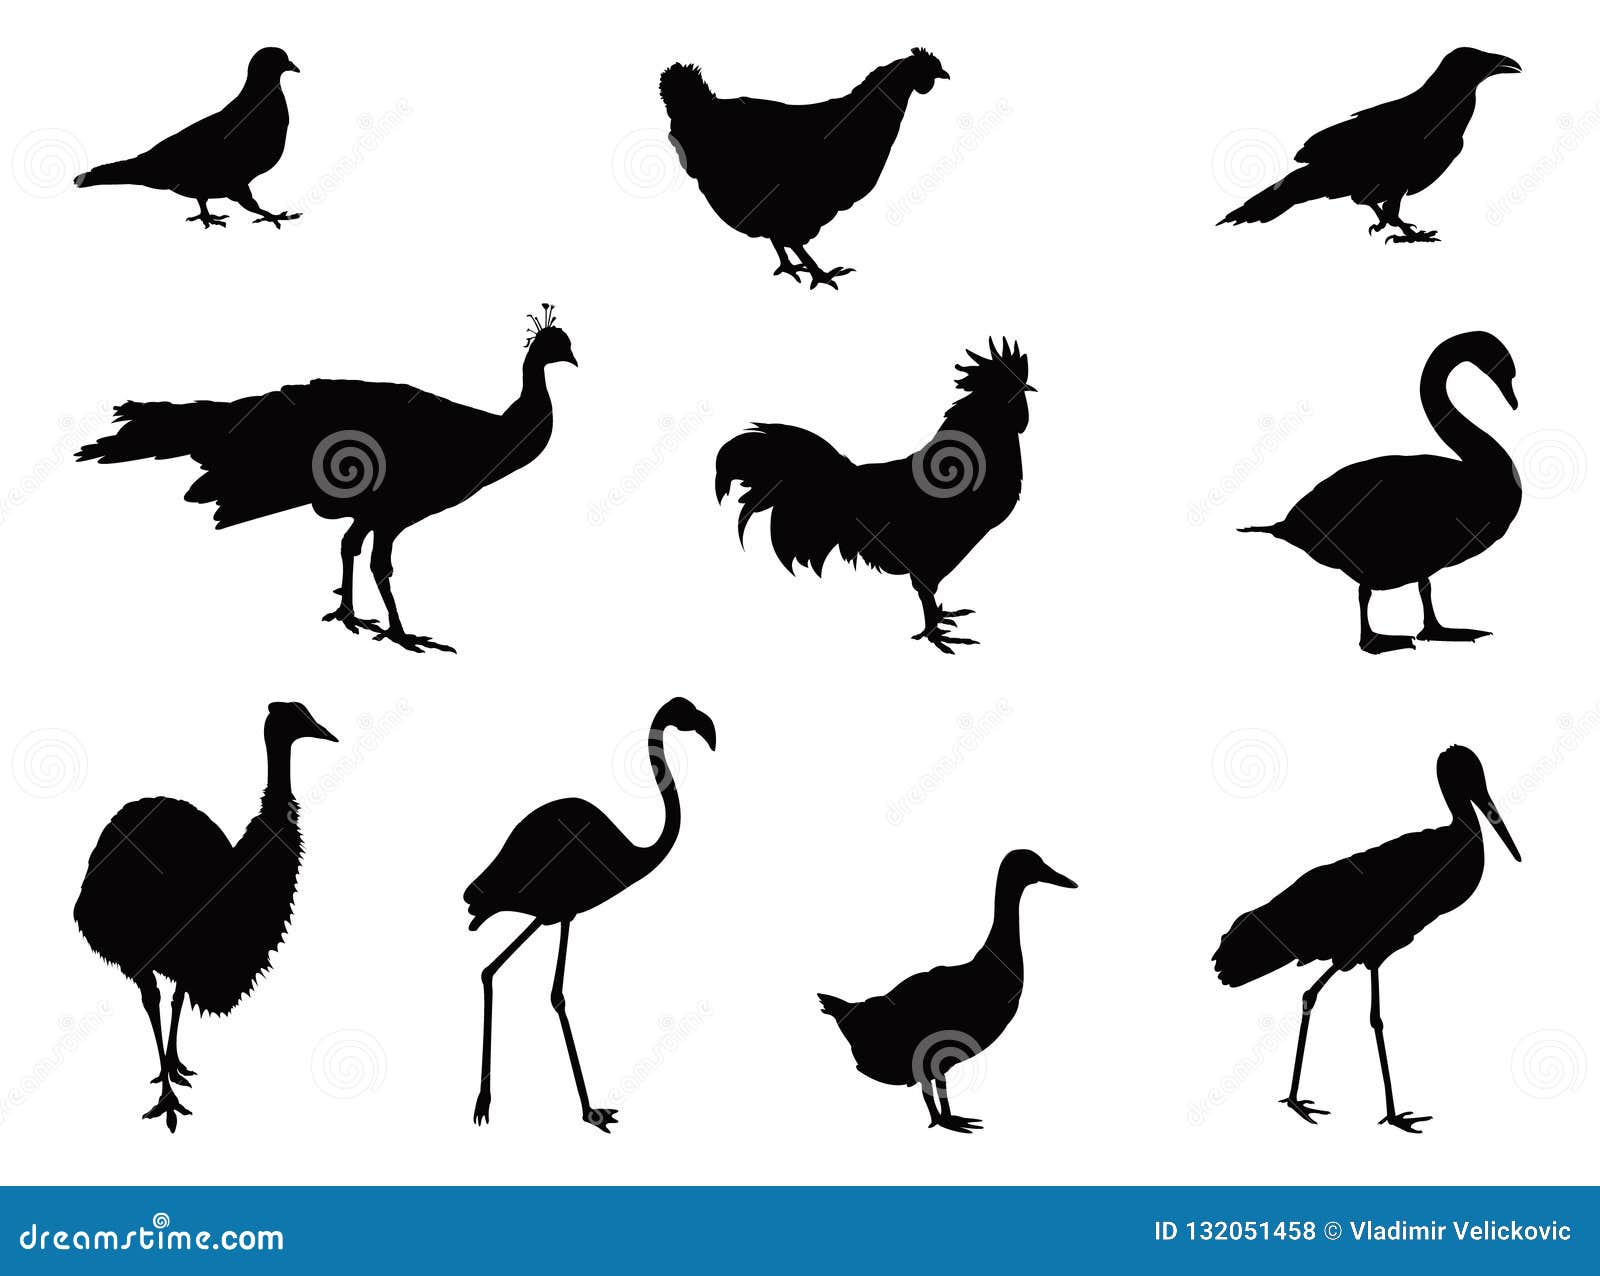 various birds silhouette - group of endothermic vertebrates, characterised by feathers, toothless beaked jaws, the laying of hard-